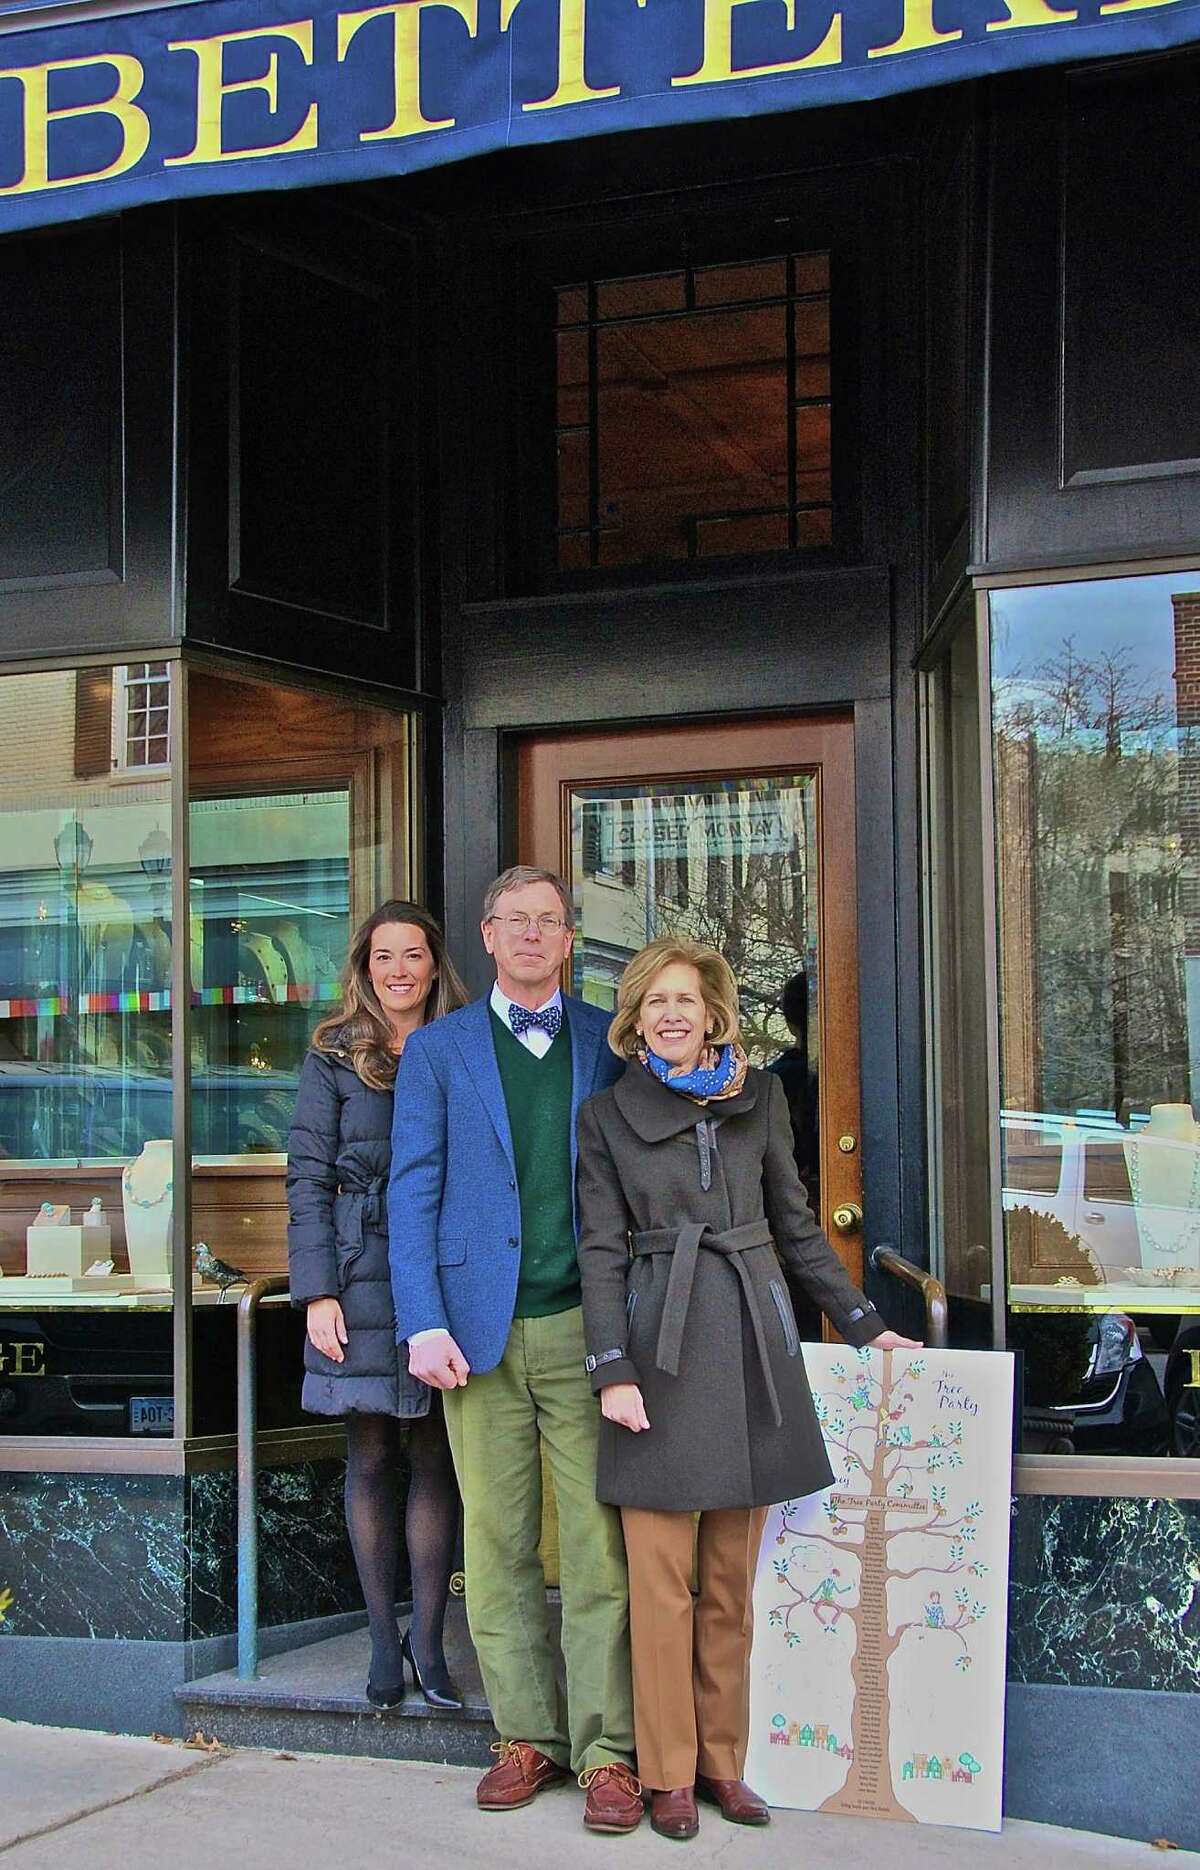 The Greenwich Tree Conservancy will hold its fourth annual Tree Party on Arbor Day, Friday, April 25 from 6:30 to 8:30 p.m. at McArdleâÄô Greenhouse on Arch St. in Greenwich. The event is open to the public. Pictured above, from left, are Ashley Allan, Co-Chairwoman of the Greenwich Tree ConservancyâÄôs Tree Party; Terry Betteridge of Betteridge Jeweler, a sponsor of the party; and Libby King, also a co-chairwoman. The GTCâÄôs mission is to preserve, maintain and enhance the trees and forest resources of Greenwich for the benefit of its citizens and also the wildlife that depends on those trees.